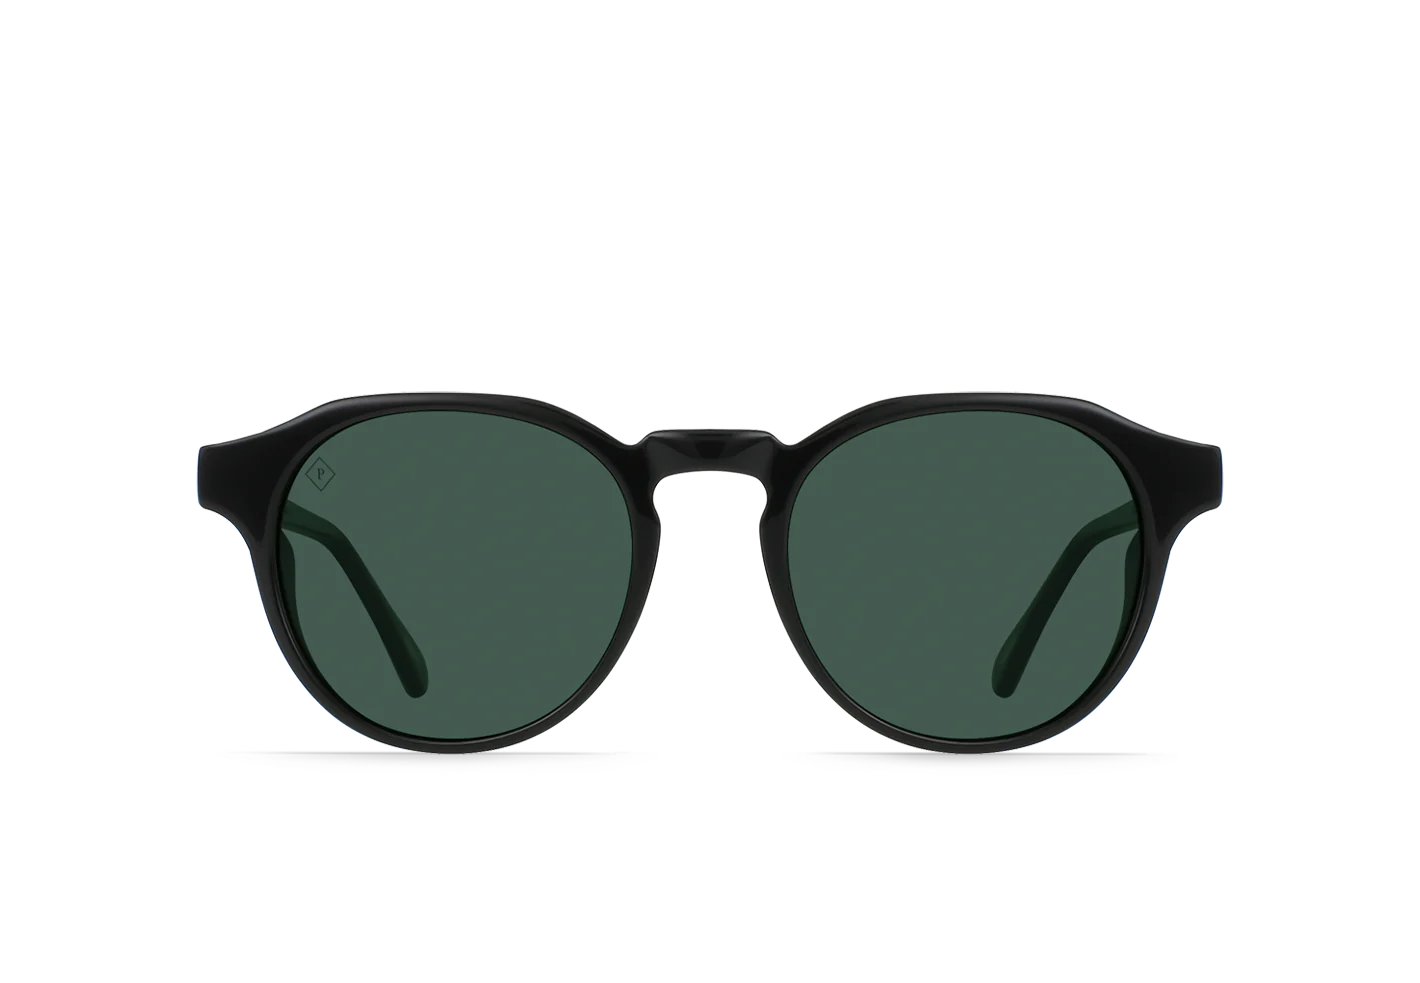 EXPEDITION REMMY sunglasses